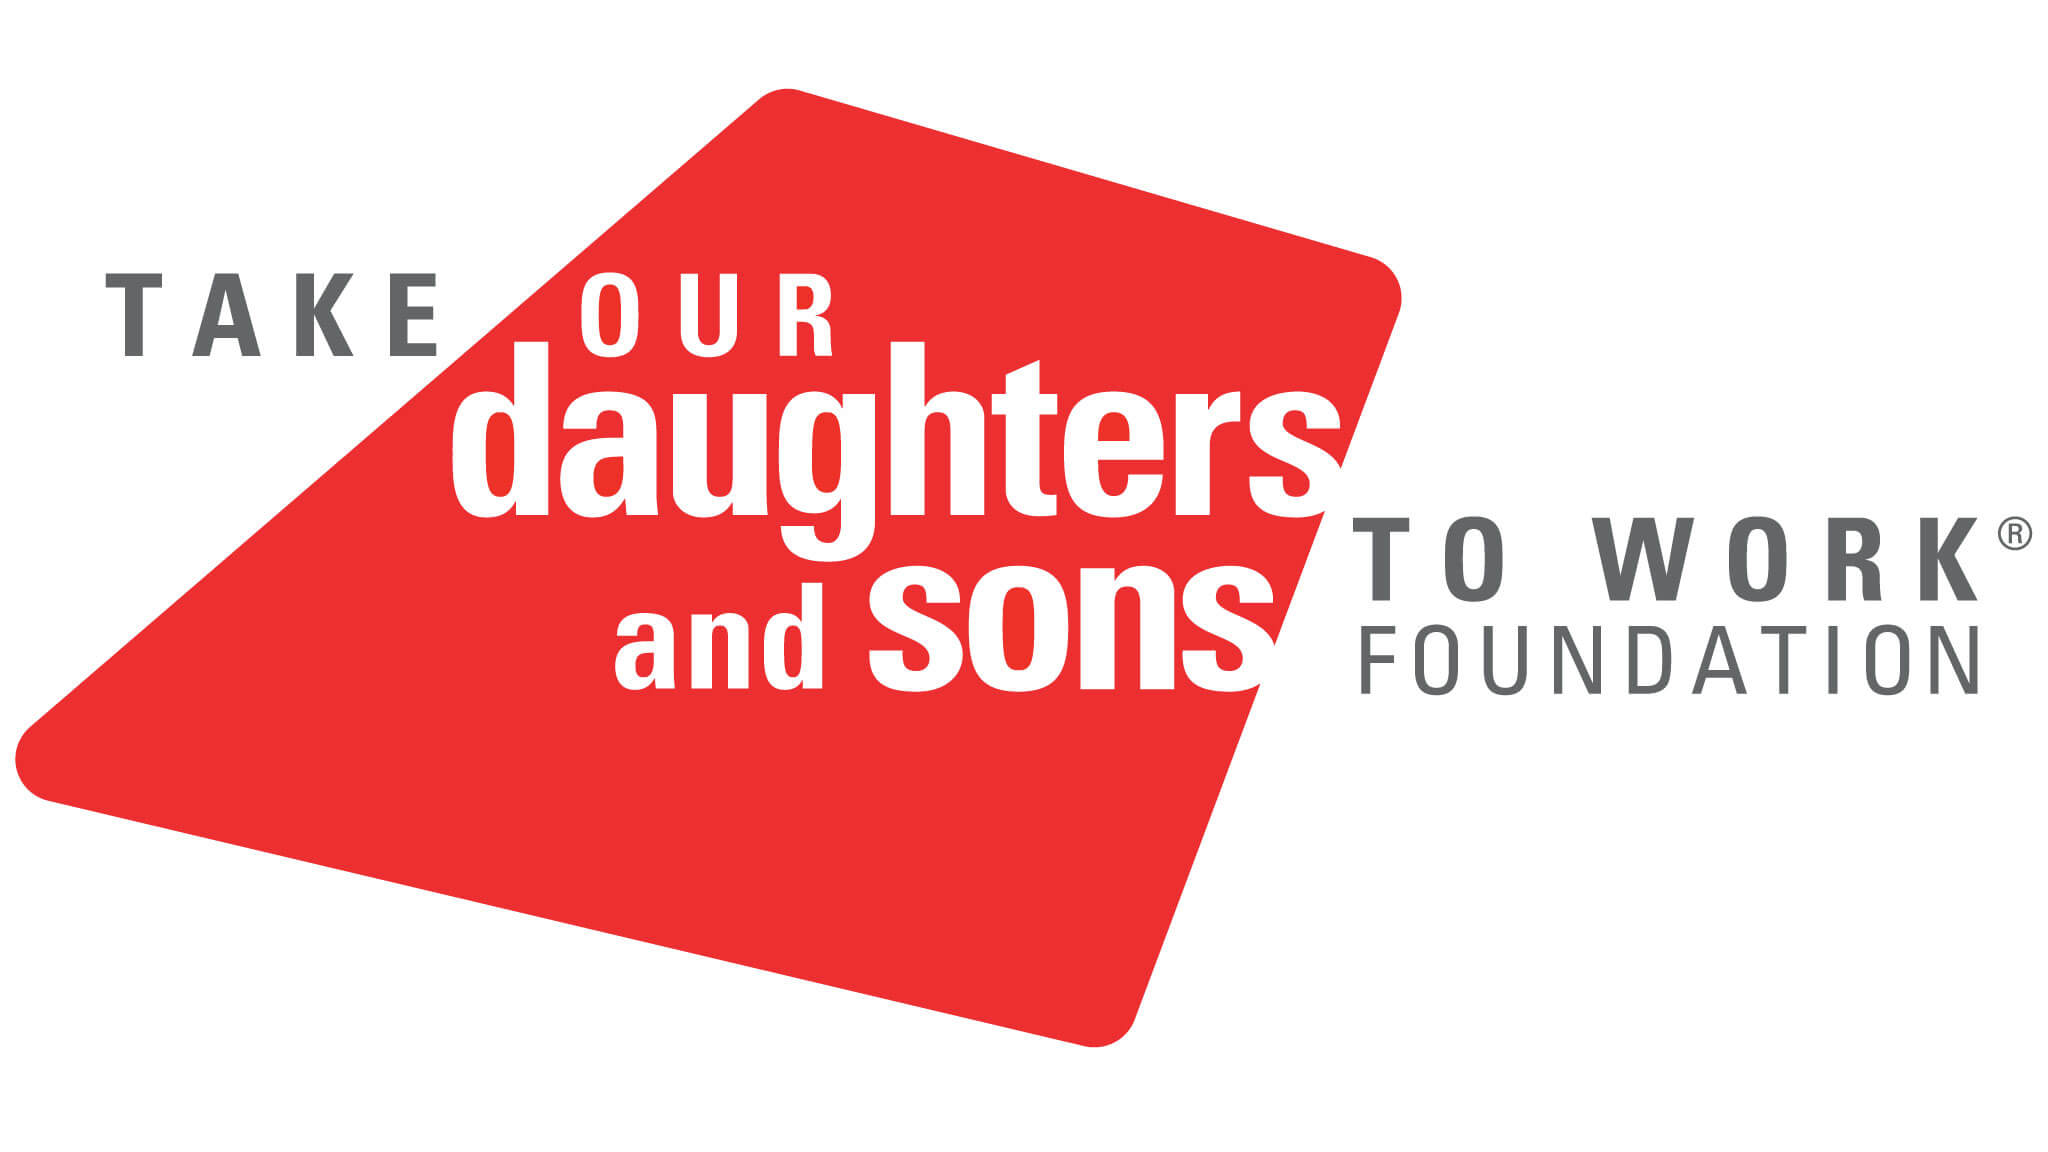 take our daughters and sons to work foundation logo